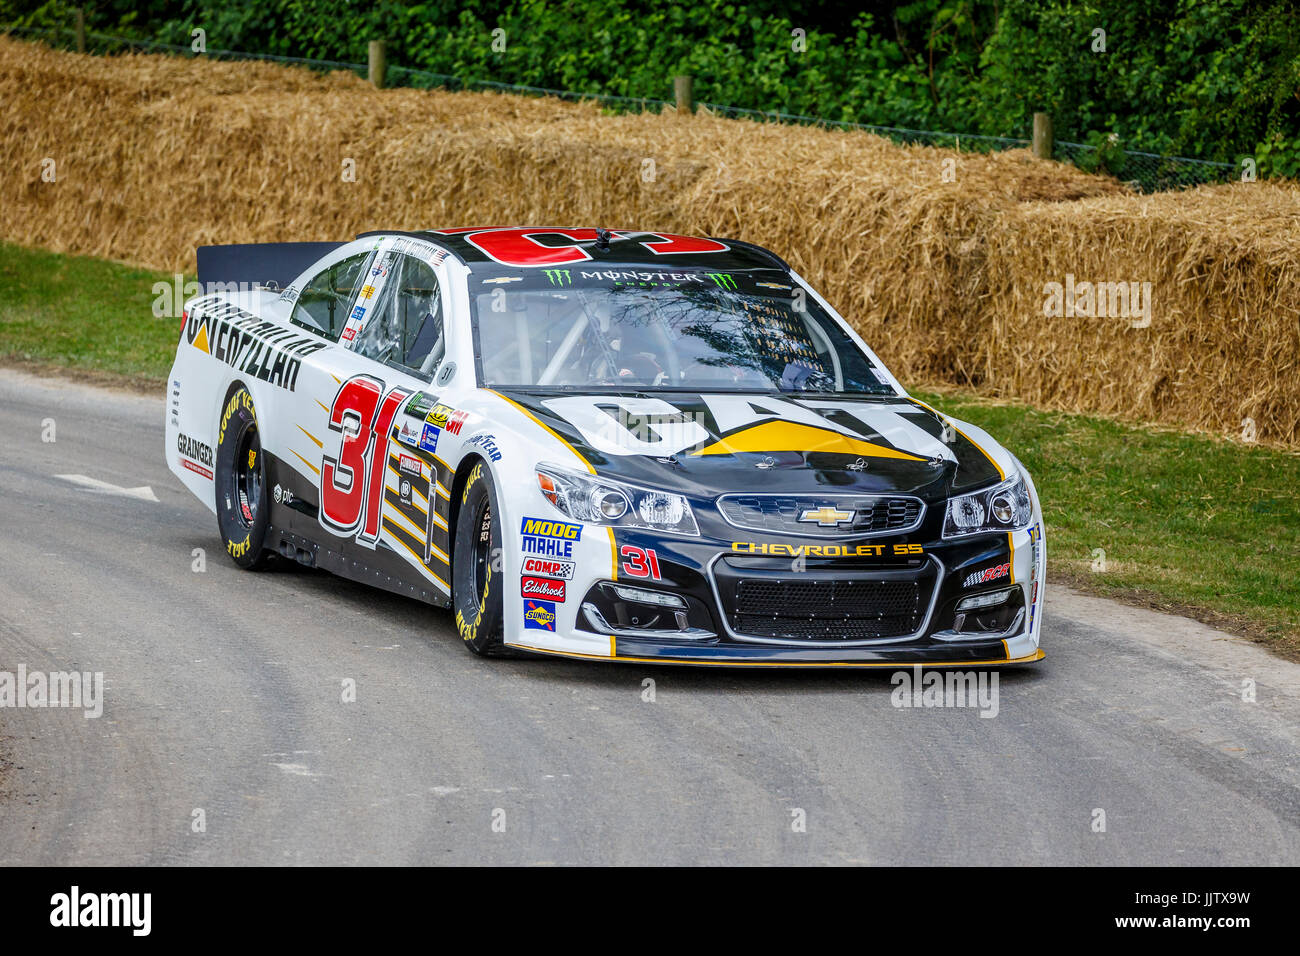 2017 Chevrolet SS NASCAR with driver Brian Vickers at the 2017 Goodwood Festival of Speed, Sussex, UK. Stock Photo